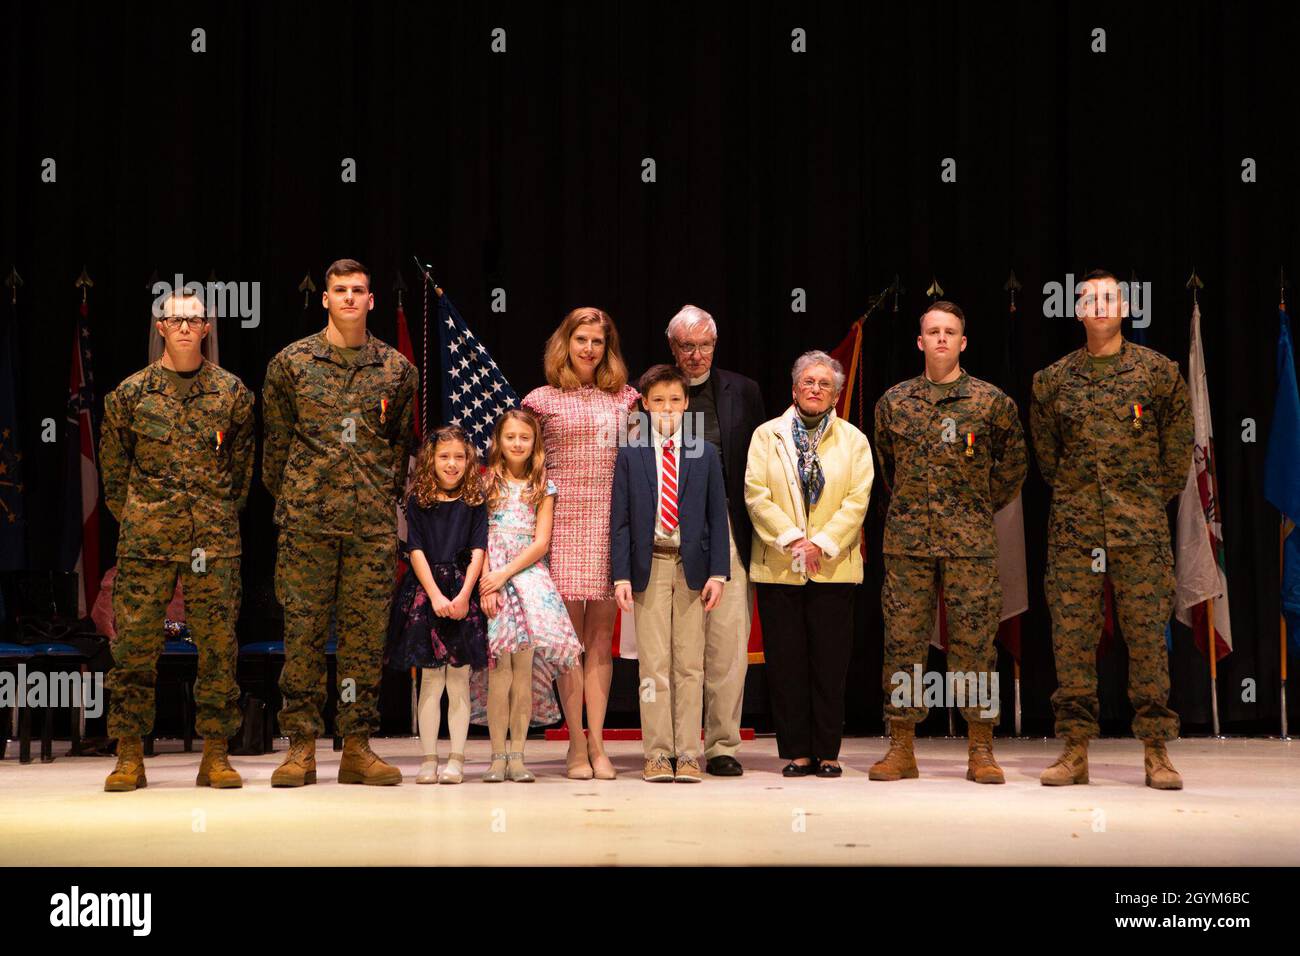 Staff Sgt. Leary Reicharwarfel (left), Sgt. Anders Larson, Cpl. Austin McMullen, and Cpl. Timothy Watson pose for a photo with the family they saved after receiving the Navy and Marine Corps Medal aboard Marine Corps Air Station Cherry Point, North Carolina, January 28, 2019. The Marines received this award for his heroic efforts while saving a family at Atlantic Beach, North Carolina. (U.S. Marine Corps photo by Staff Sgt. William L. Holdaway) Stock Photo